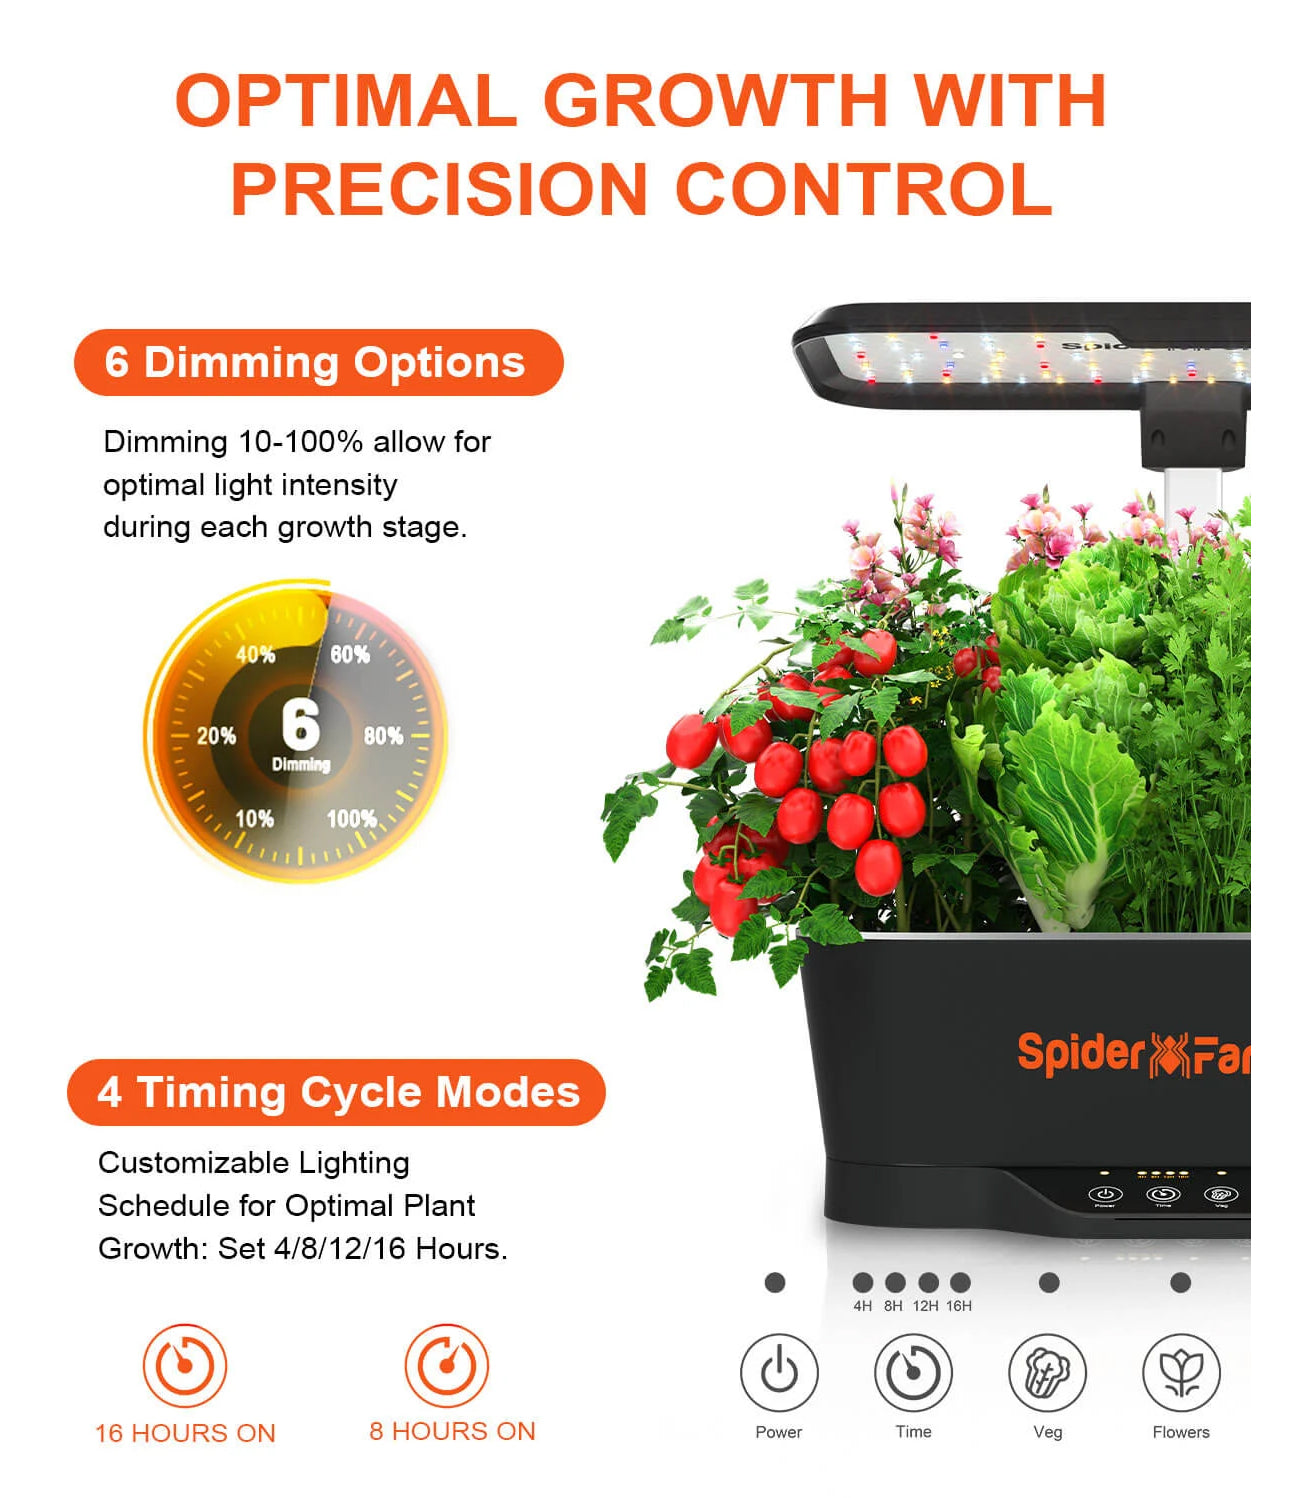 Spider Farmer Smart G12 Hydroponics Growing System With Led Grow Light